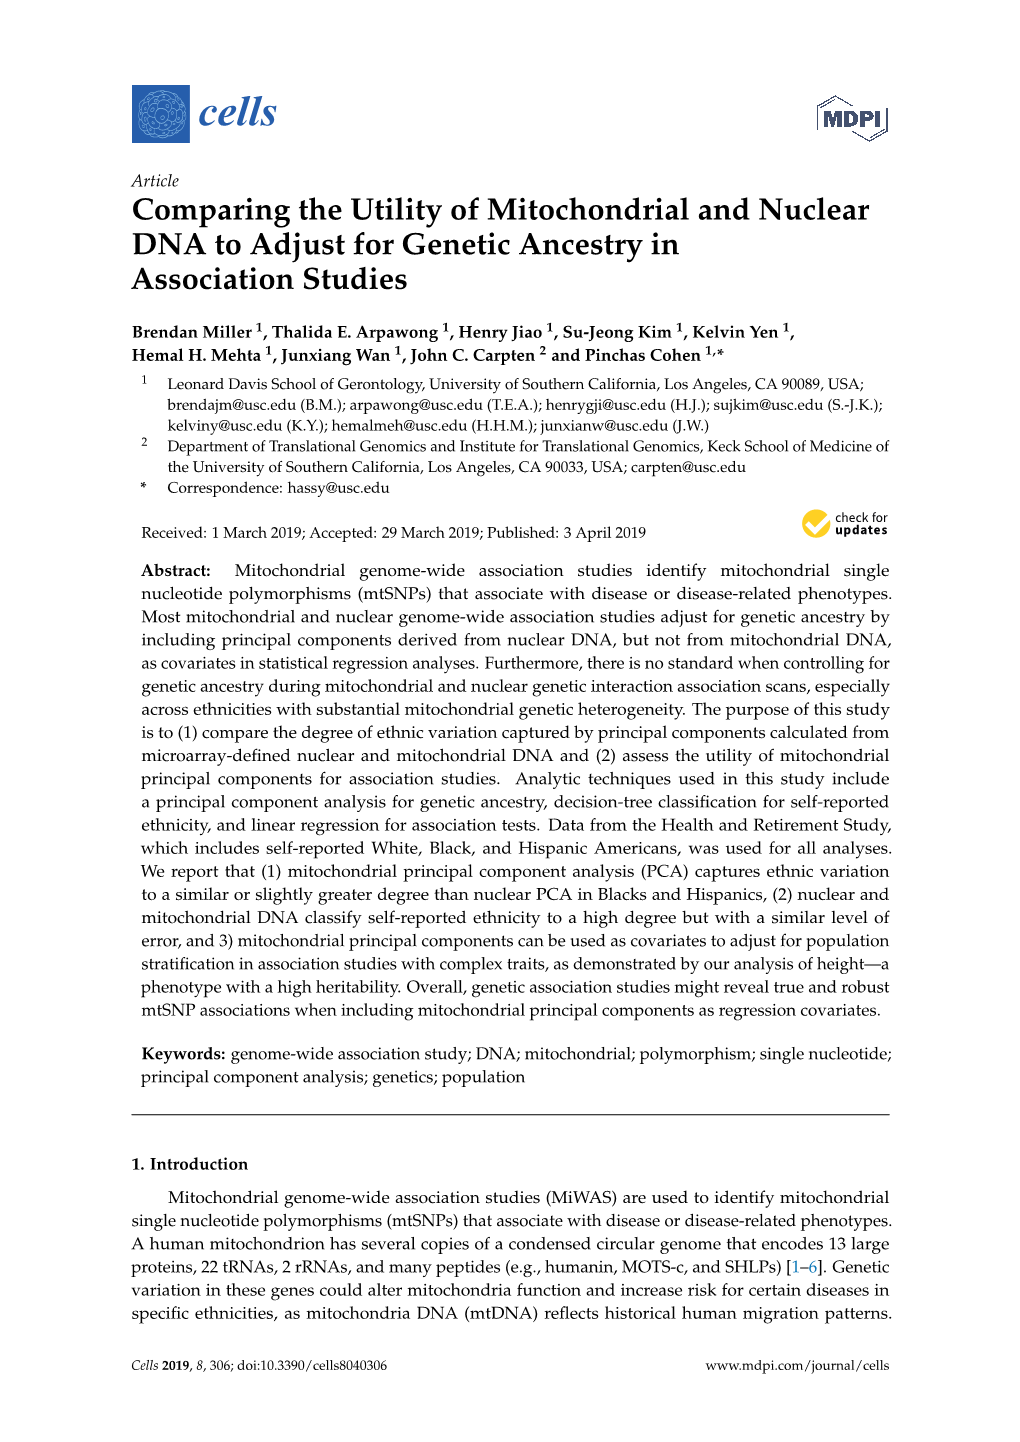 Comparing the Utility of Mitochondrial and Nuclear DNA to Adjust for Genetic Ancestry in Association Studies